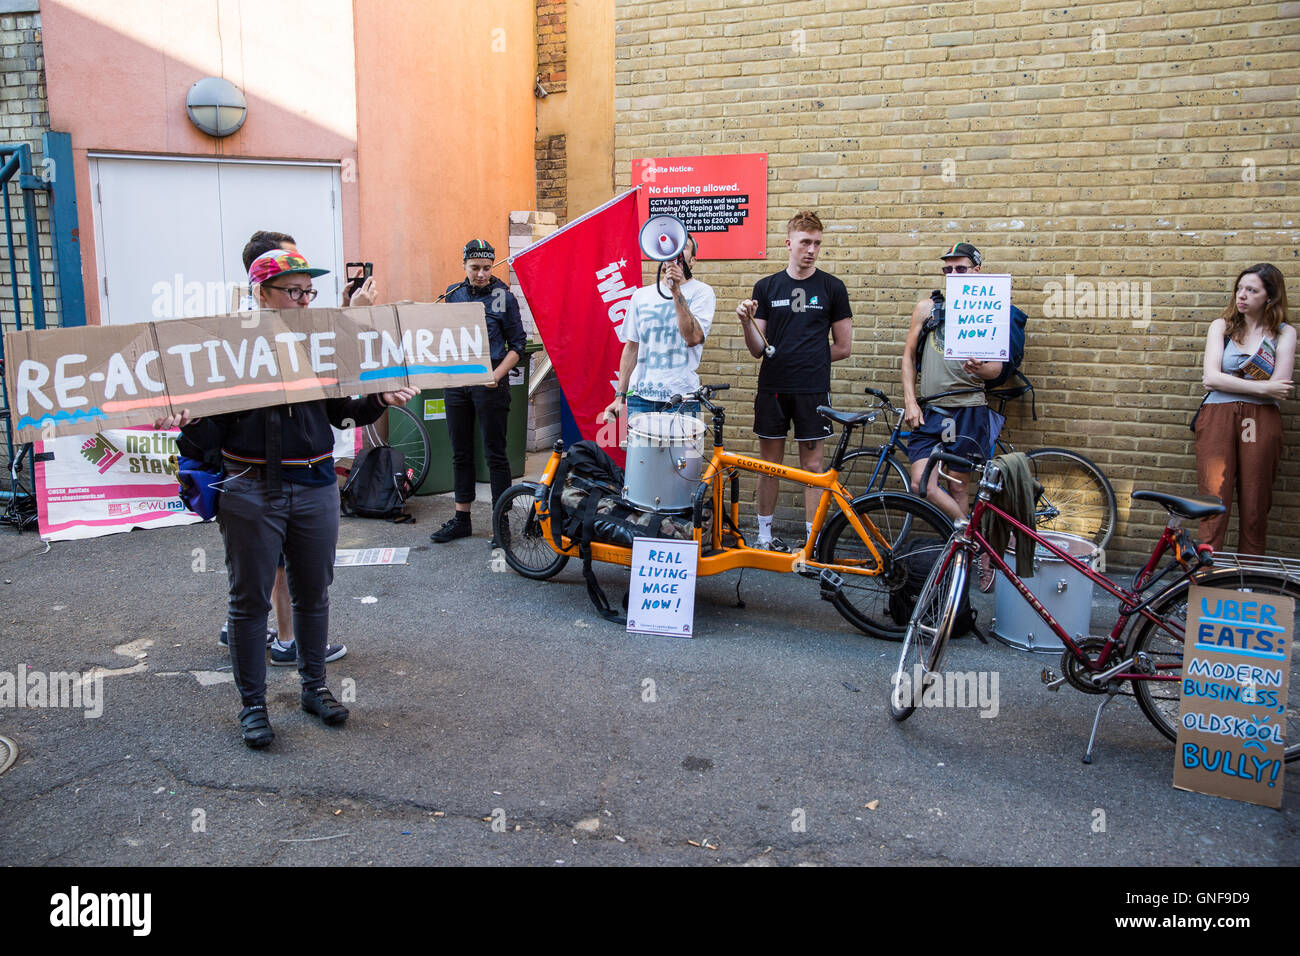 London, UK. 30th Aug, 2016. Members and supporters of the IWGB trade union protest outside the headquarters of UberEats, Uber's fast-food delivery service, to call for the reinstatement of Imran Siddiqui, the organiser of an earlier protest against a pay cut for the company's couriers. Credit:  Mark Kerrison/Alamy Live News Stock Photo